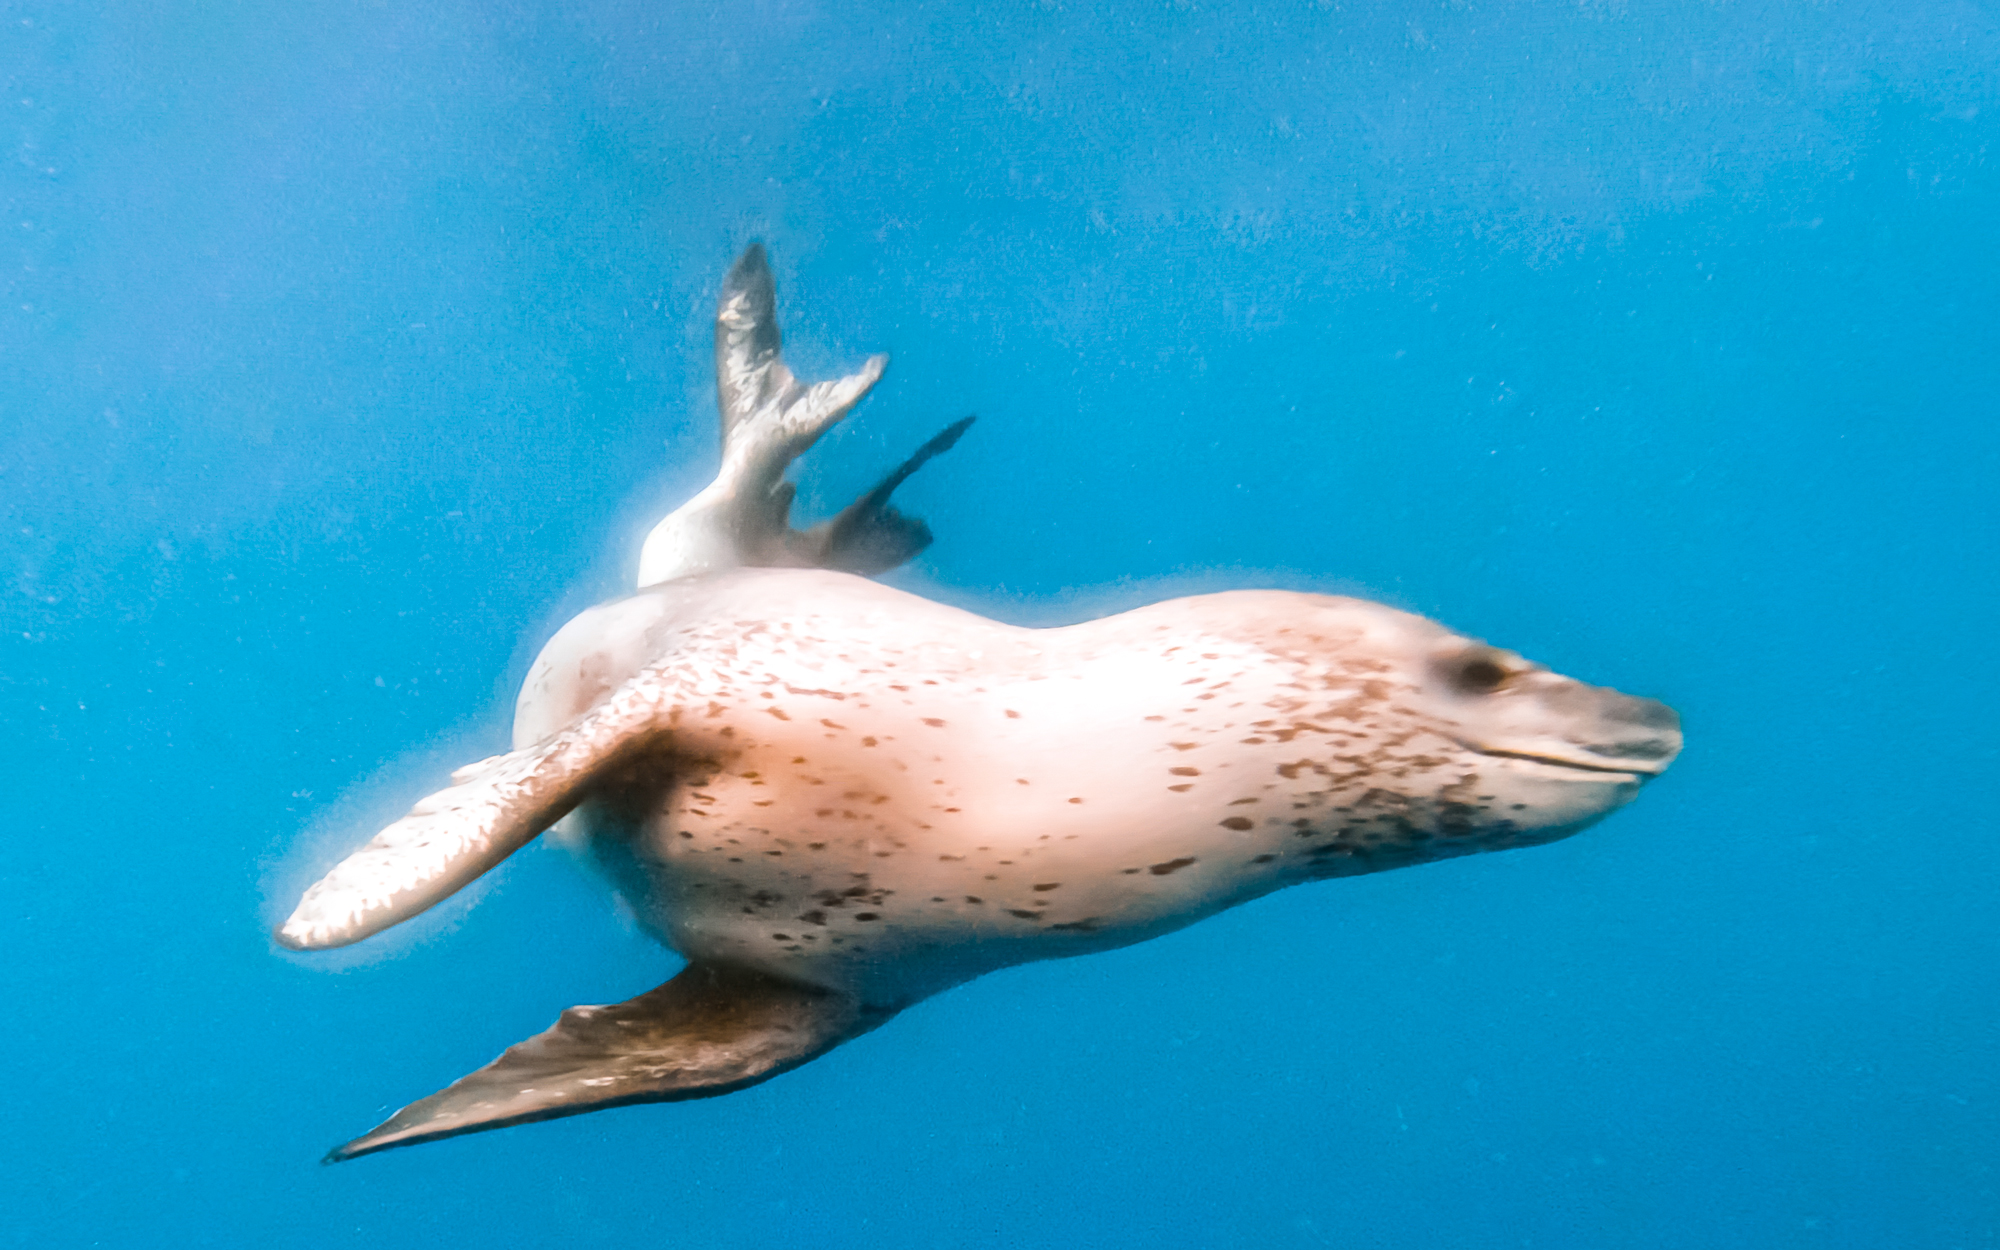 A leopard seal in blue waters shot with a goPro